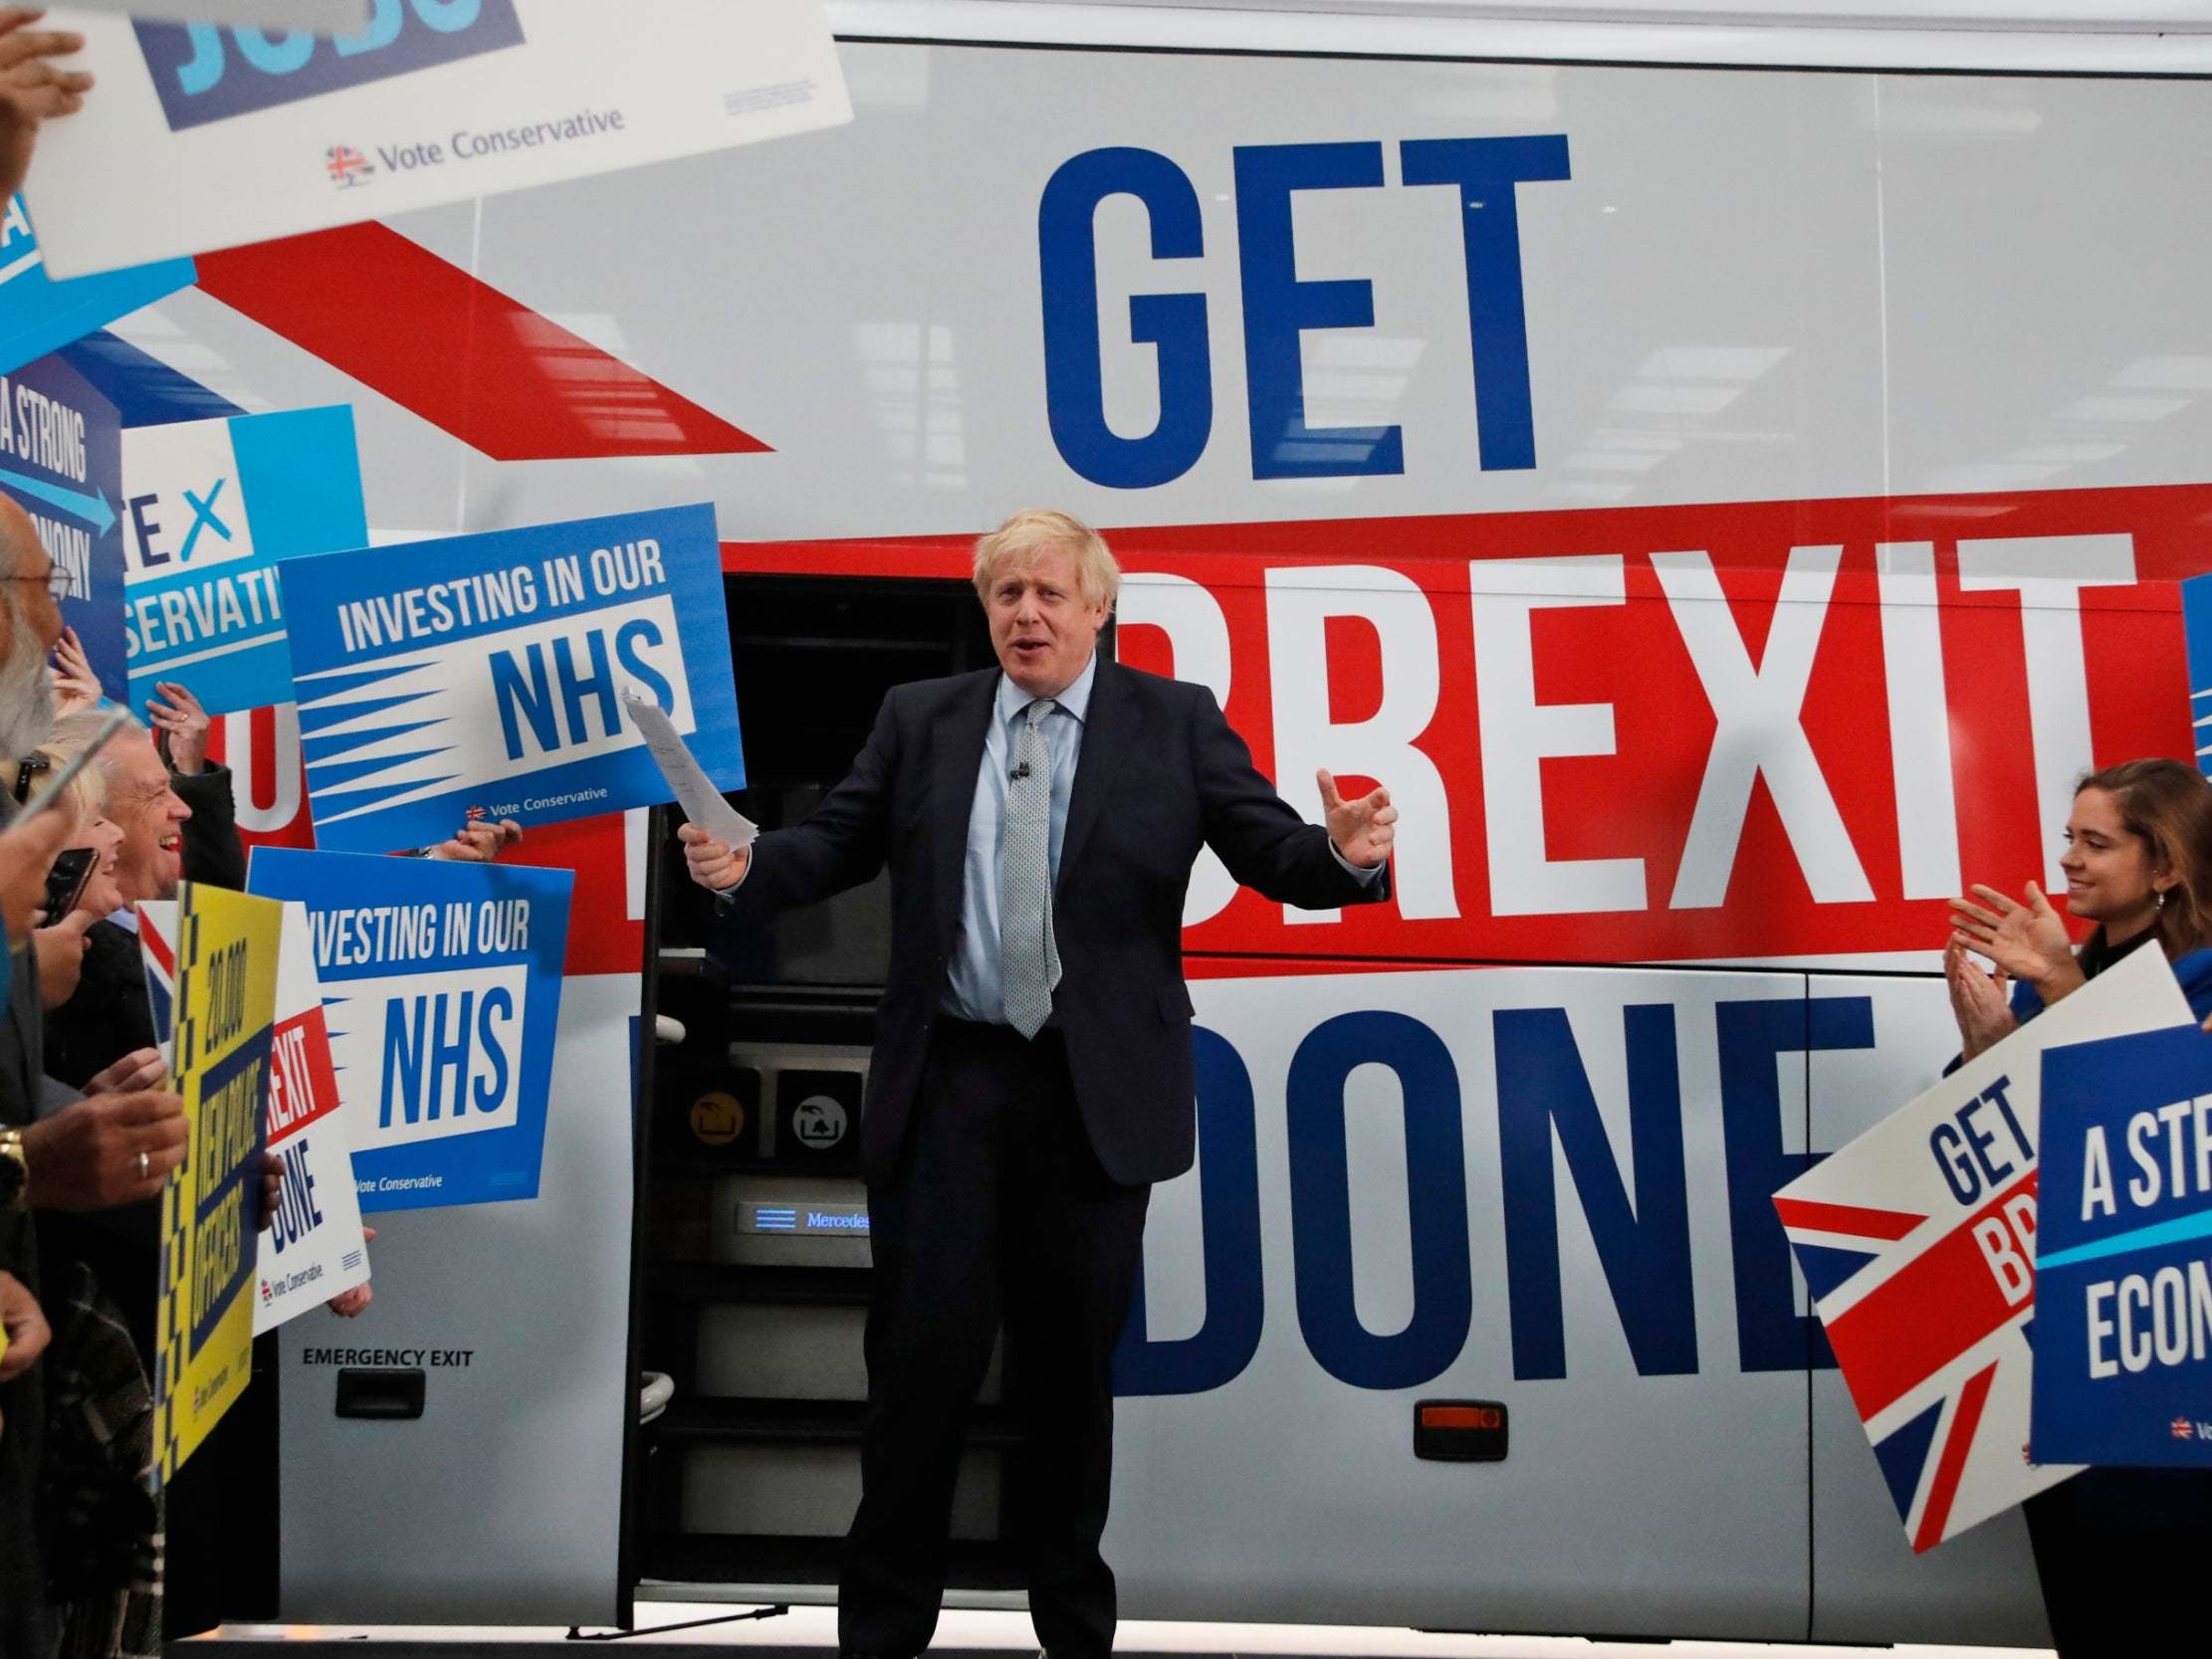 Boris Johnson steps from his battle bus during a campaign trail stop in Middleton, Manchester, on Friday